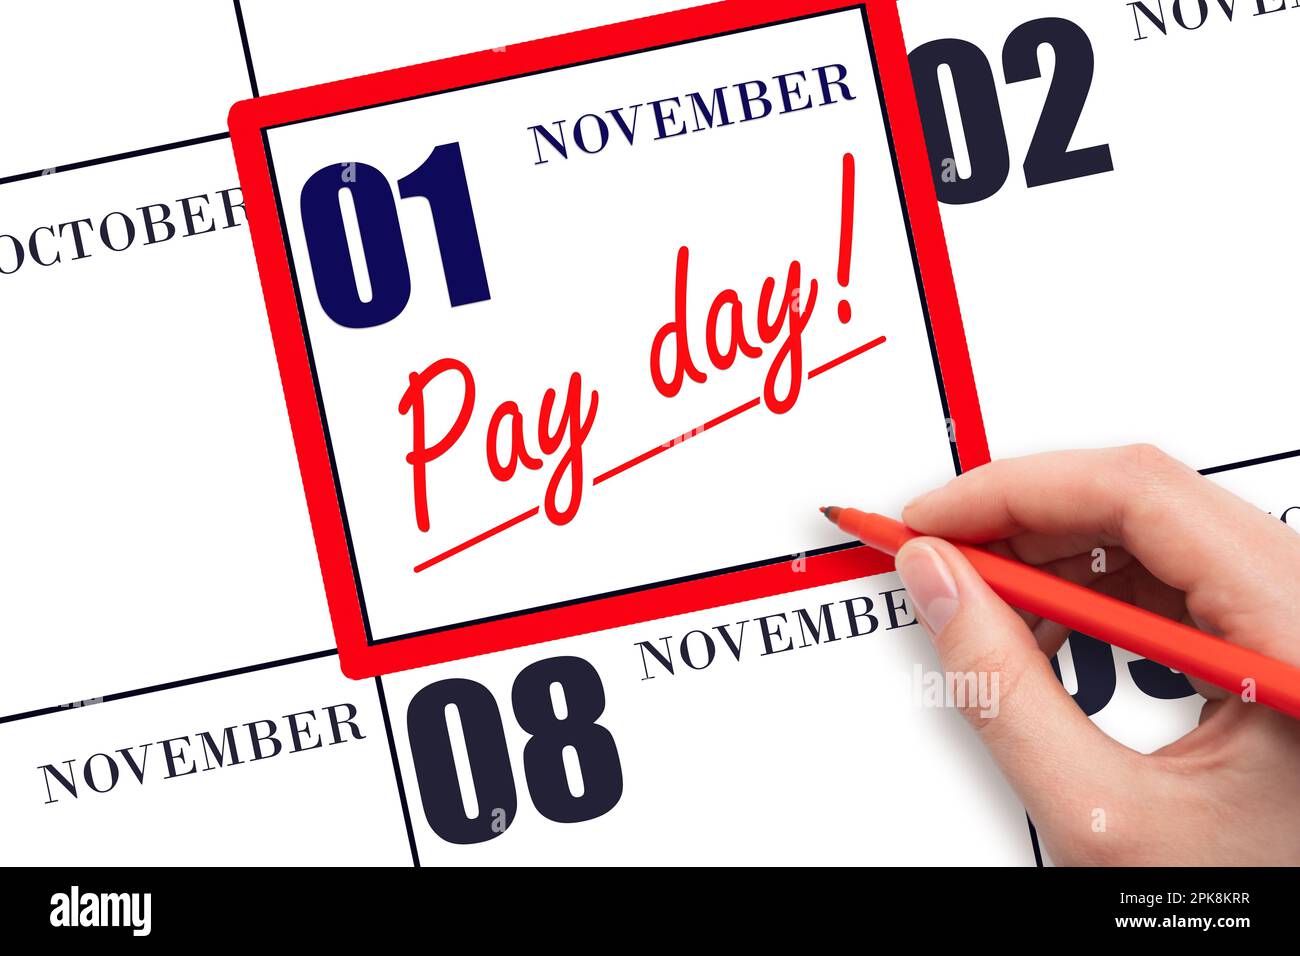 1st day of November. Hand writing text PAY DATE on calendar date November 1 and underline it. Payment due date. Reminder concept of payment. Autumn mo Stock Photo